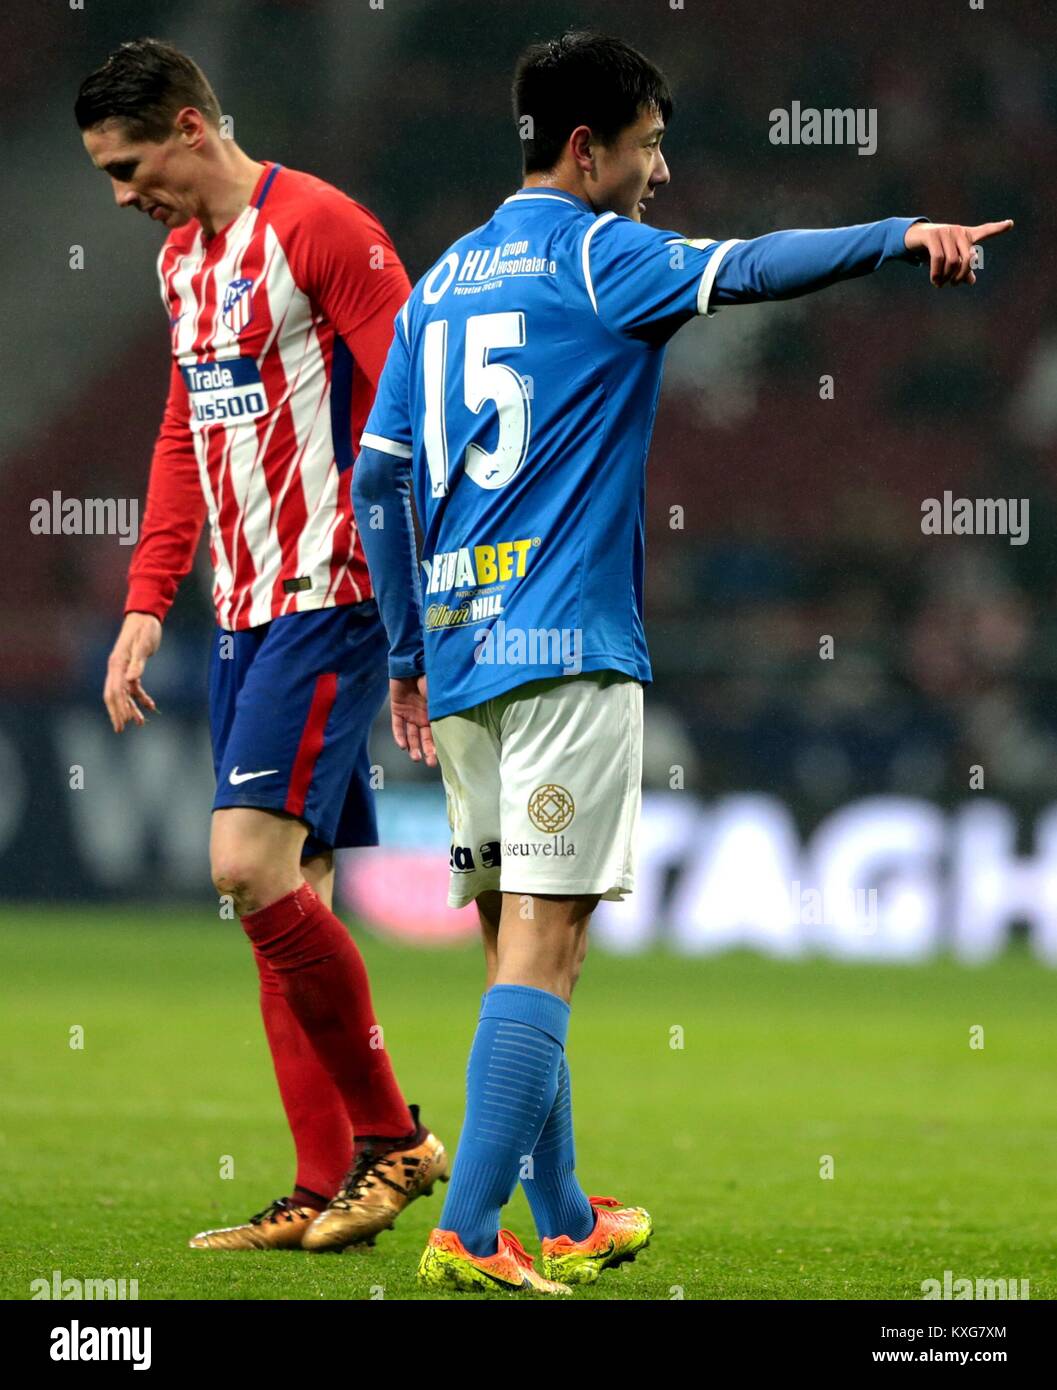 Madrid, Spain. 9th Jan, 2018. Lleida's Cheng Hui (R) gestures as Atletico Madrid's Fernando Torres passes by during the Spanish King's Cup round of 16 second leg match between Atletico Madrid and Lleida in Madrid, Spain, on Jan. 9, 2018. Atletico Madrid defeated Lleida with 3-0 and advanced to the quarterfinal with 7-0 on aggregate. Credit: Juan Carlos Rojas/Xinhua/Alamy Live News Stock Photo